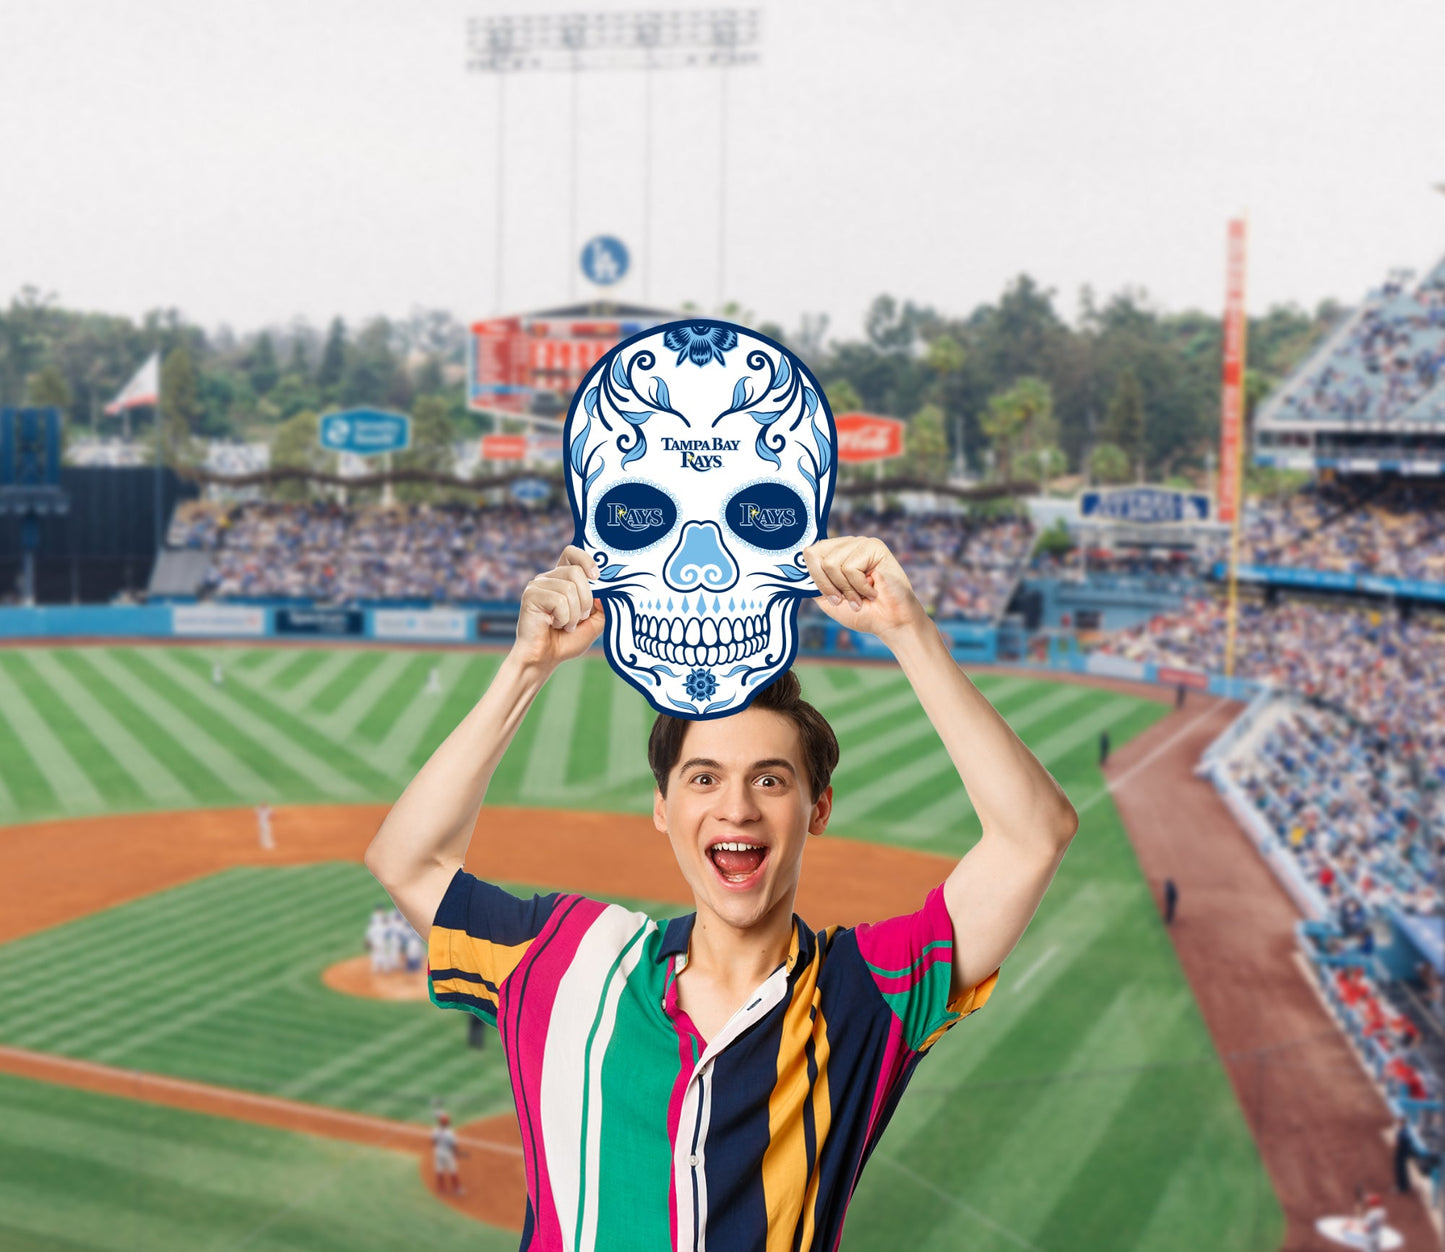 Tampa Bay Rays: Skull Foam Core Cutout - Officially Licensed MLB Big Head